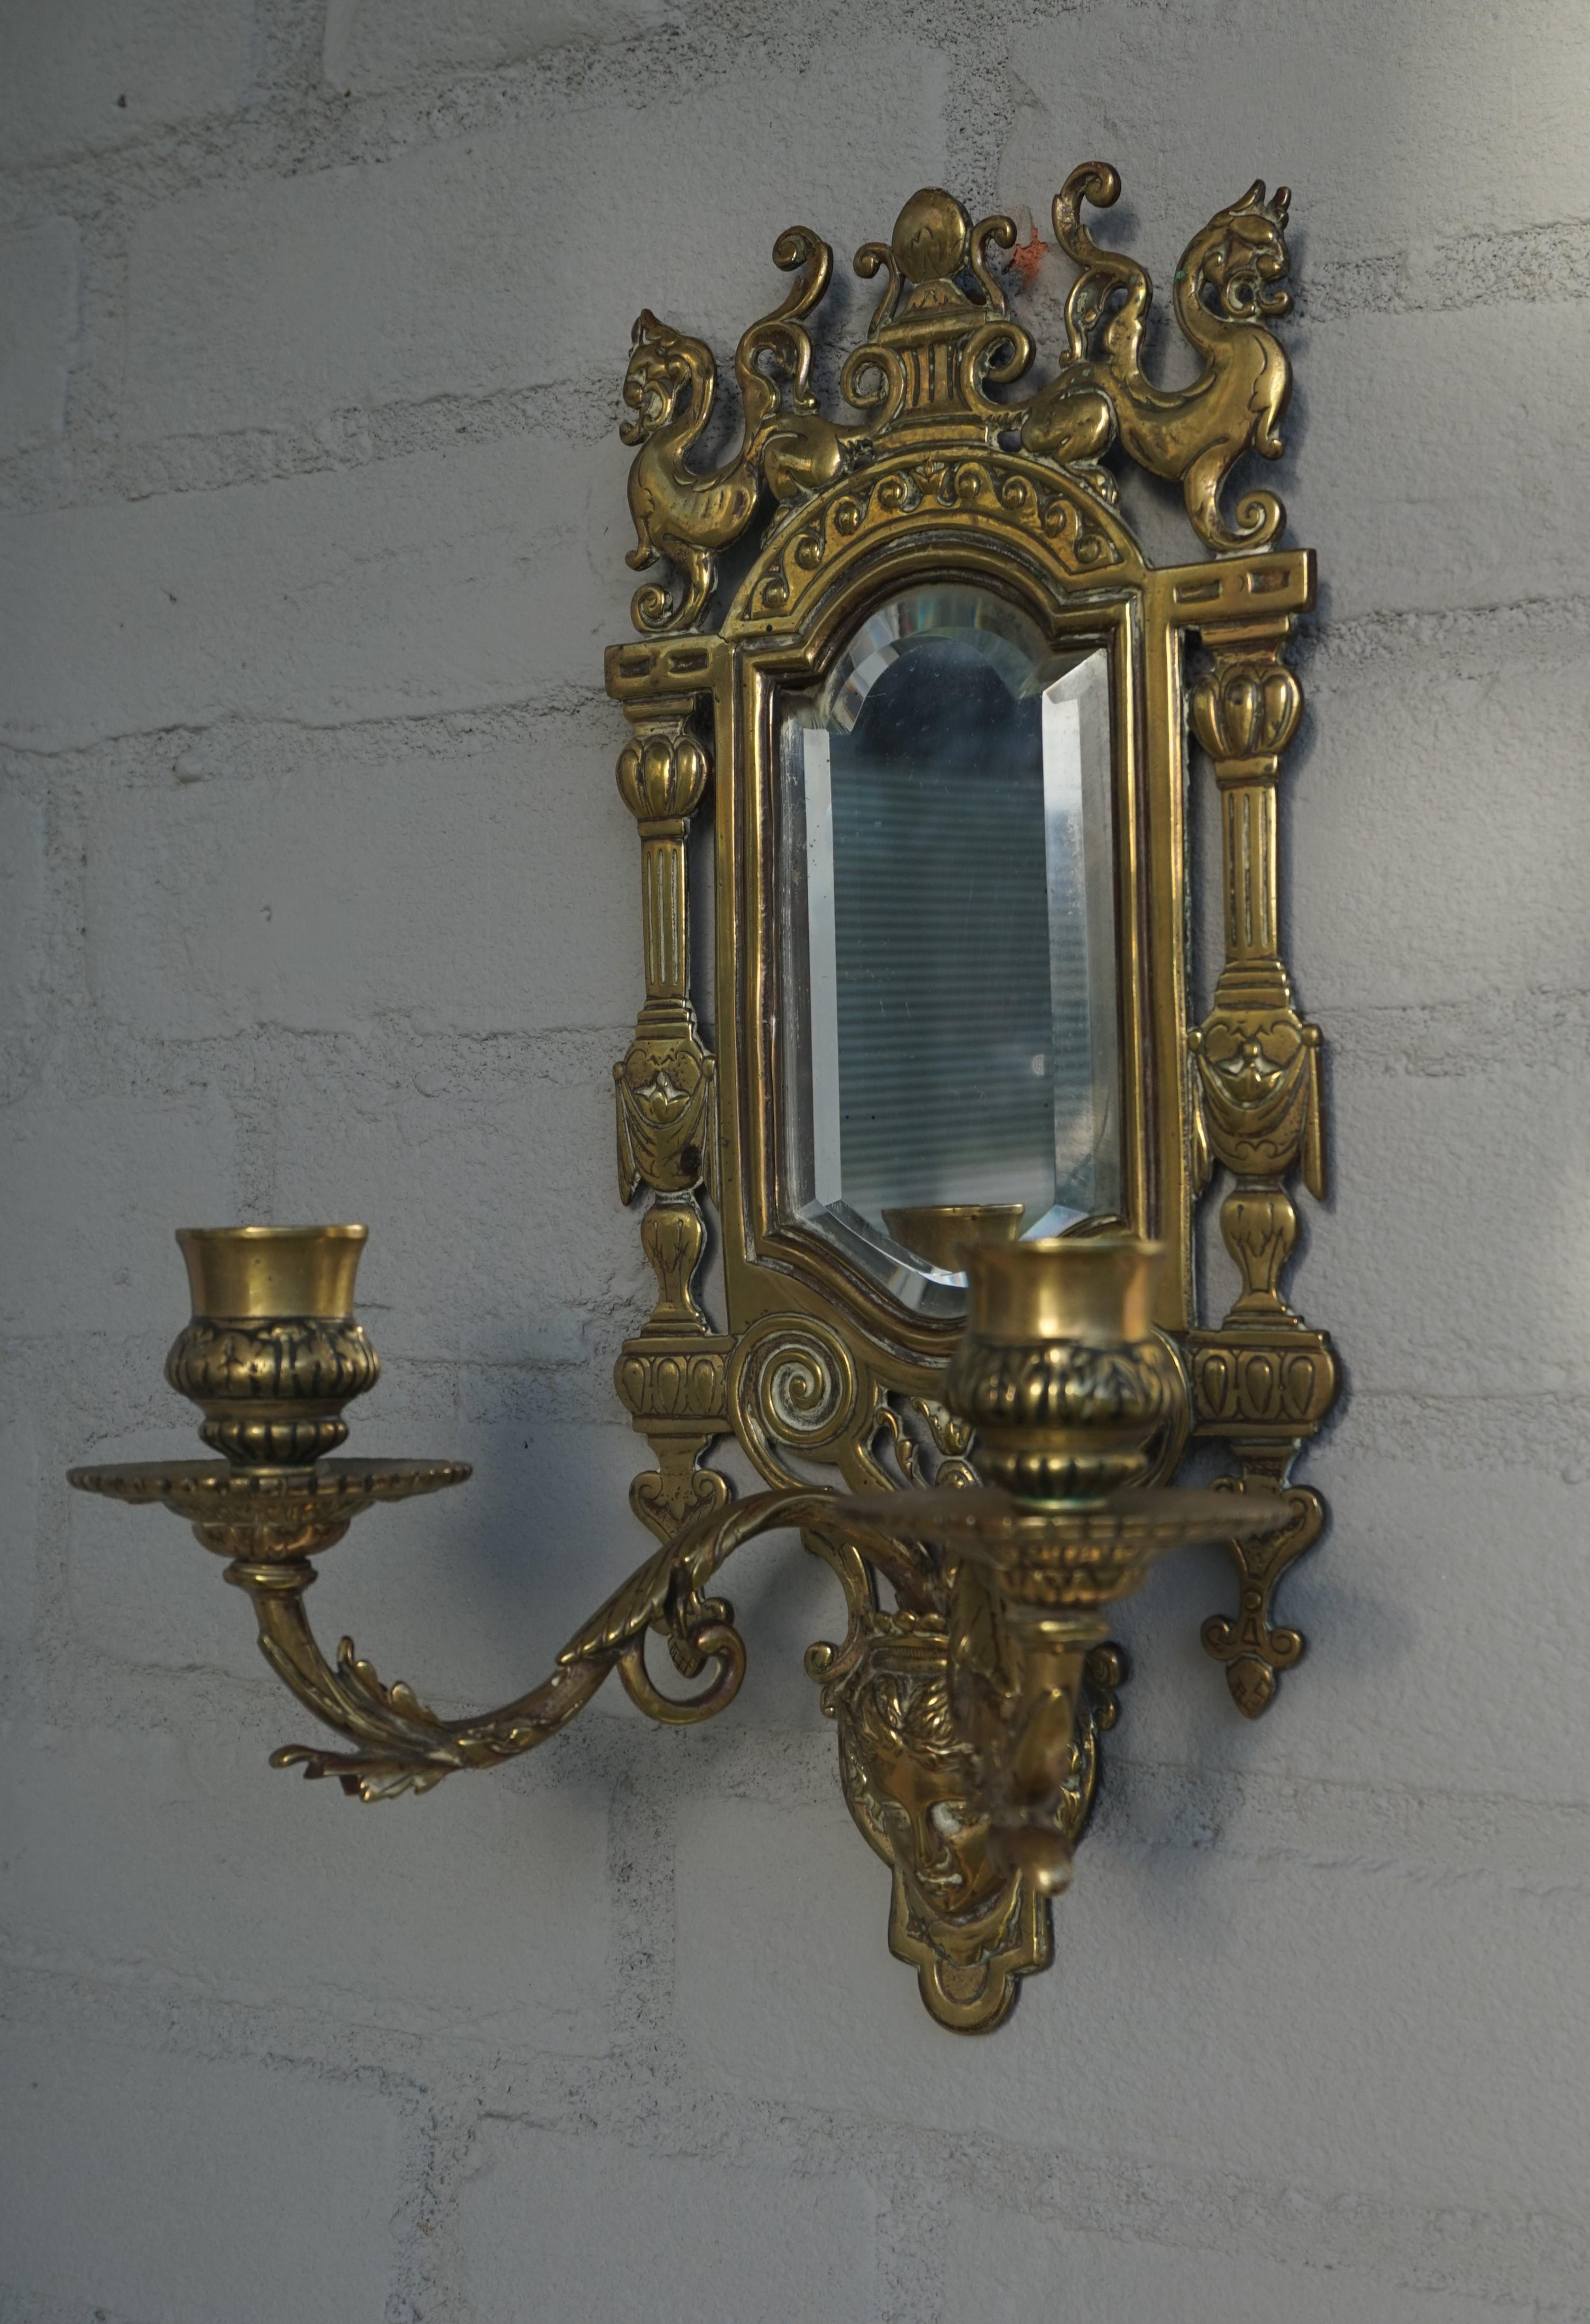 Beautiful design and practical size pair of Renaissance style candle sconces.

This antique pair of bronze sconces will look great above a side table, your bedside cabinets or in a hallway on either side of a mirror. This pair comes with the